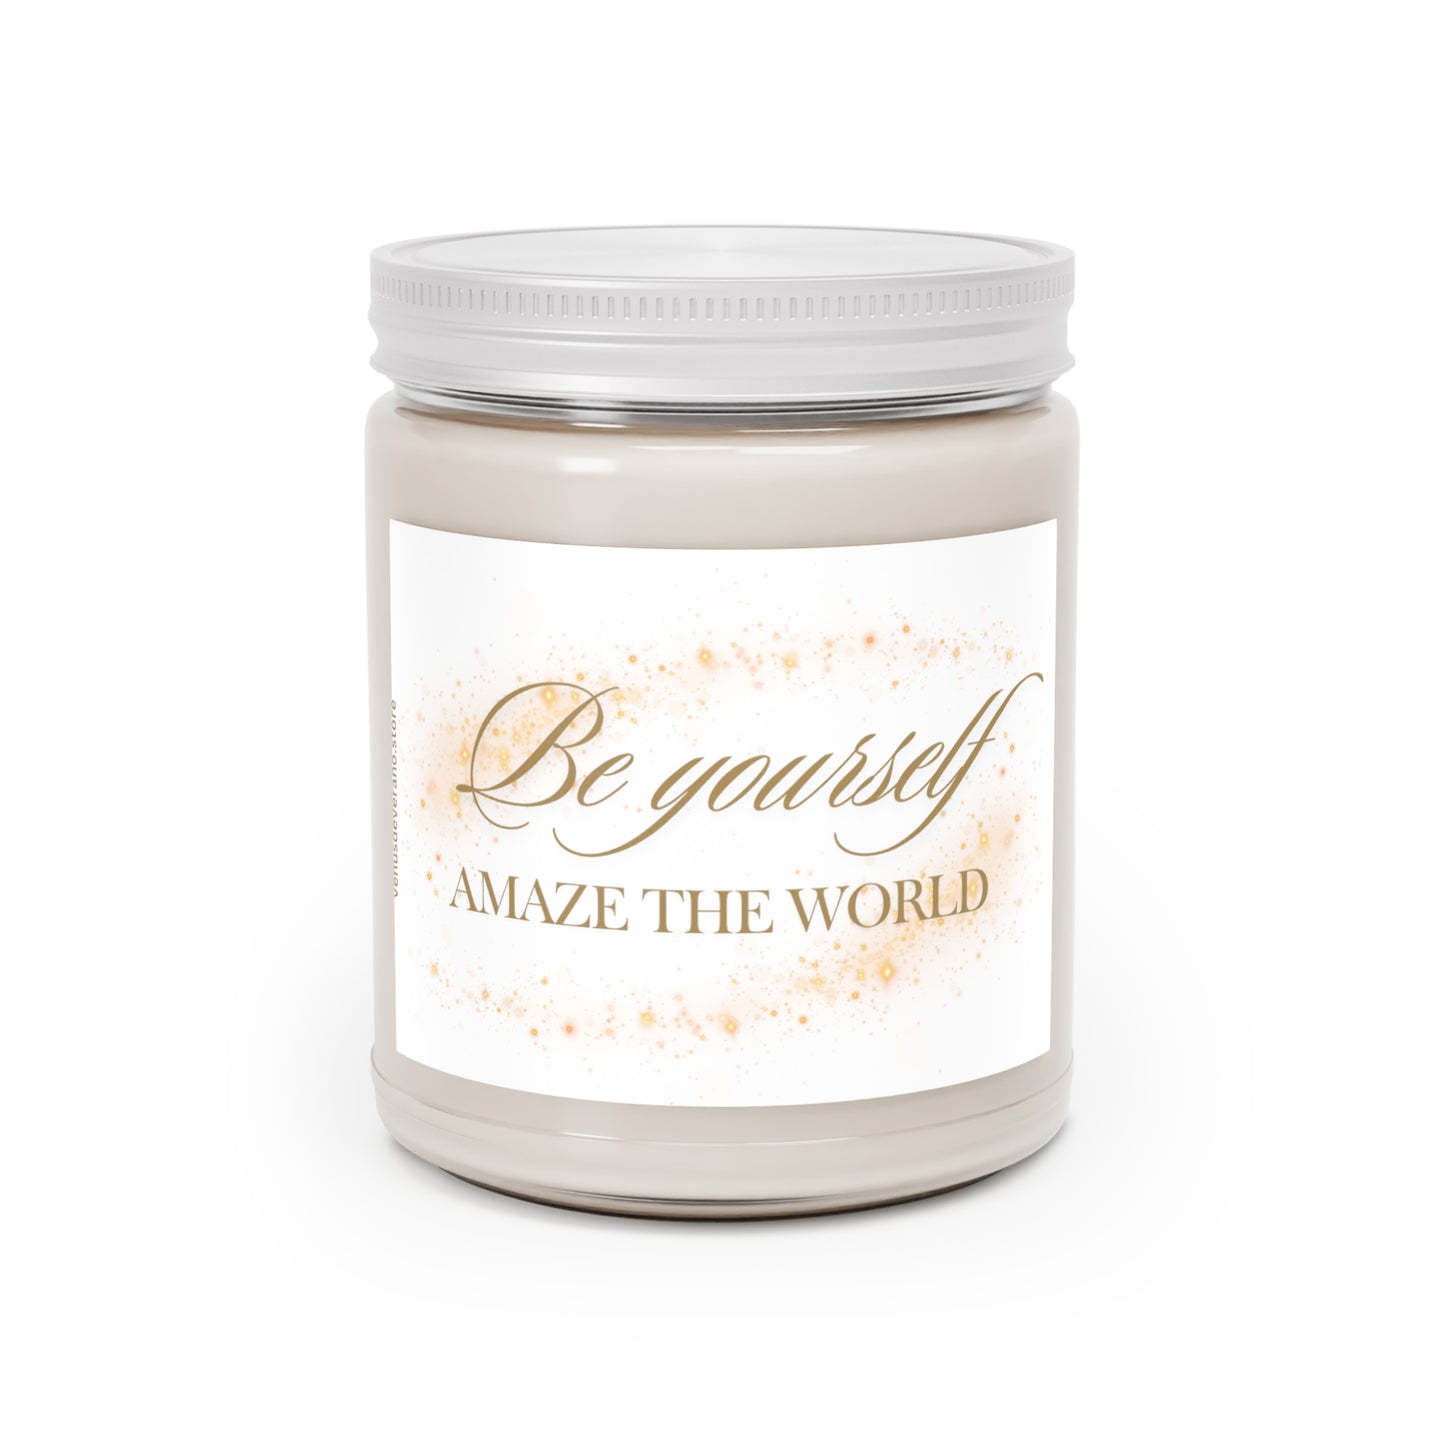 Scented Candles, 9oz - BE YOURSELF Amaze the World- Made 100% natural soy wax blend and cotton wick - Vanilla Bean, Comfort Spice and Sea Breeze fragrances available.